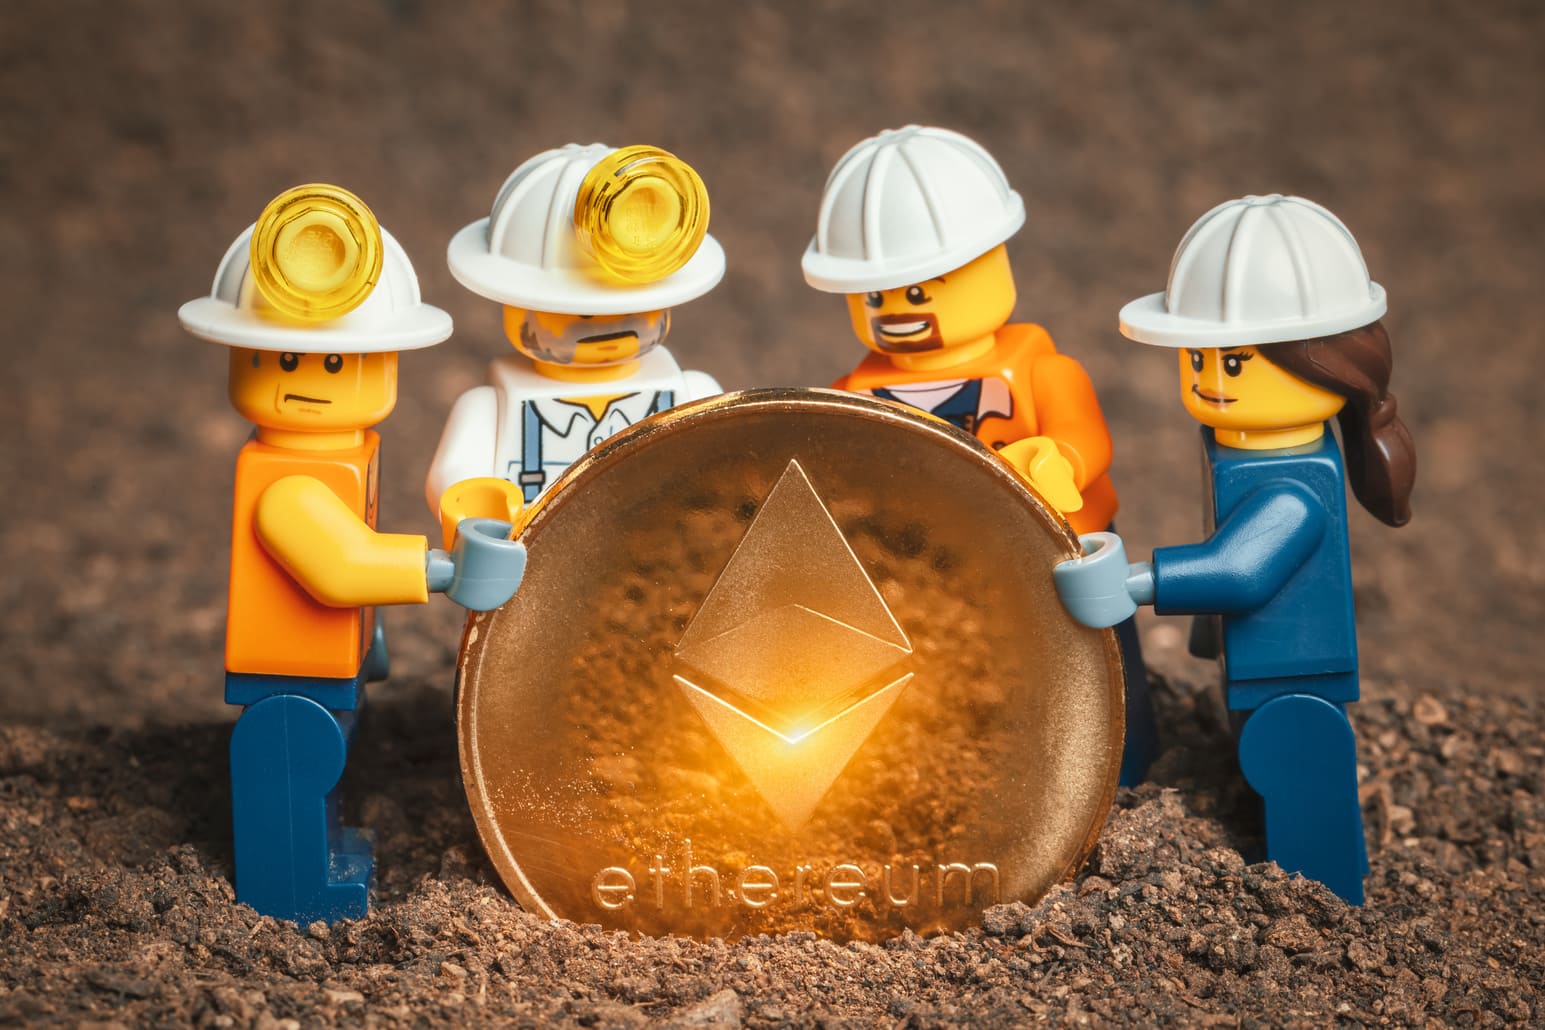 Ethereum could complete ‘The Merge’ by September 19